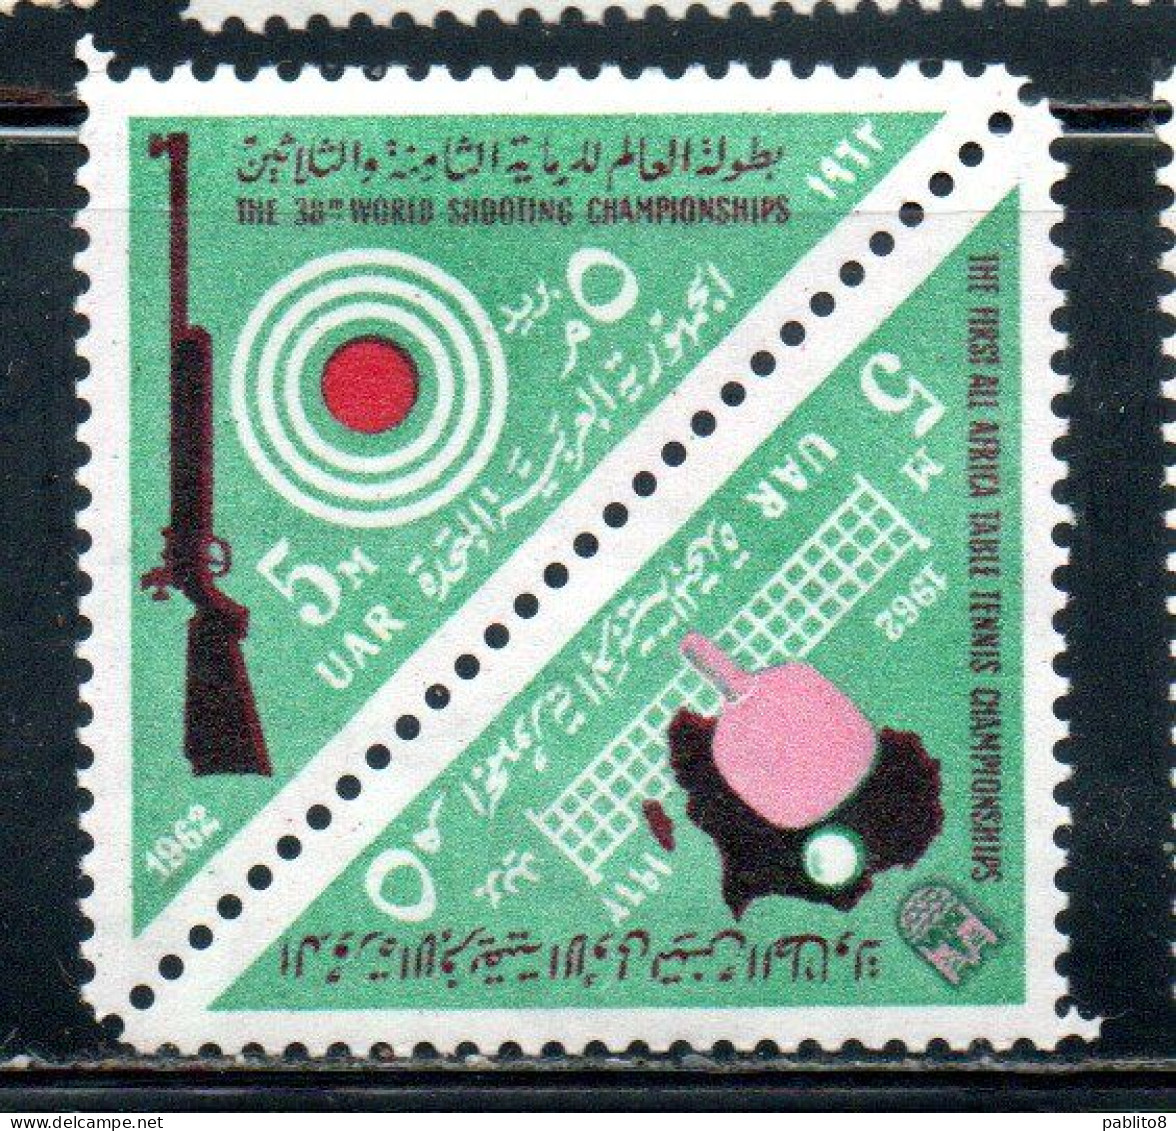 UAR EGYPT EGITTO 1962 WORLD SHOOTING CHAMPIONSHIPS AND AFRICAN TABLE TENNIS TOURNAMENT 5m MNH - Neufs